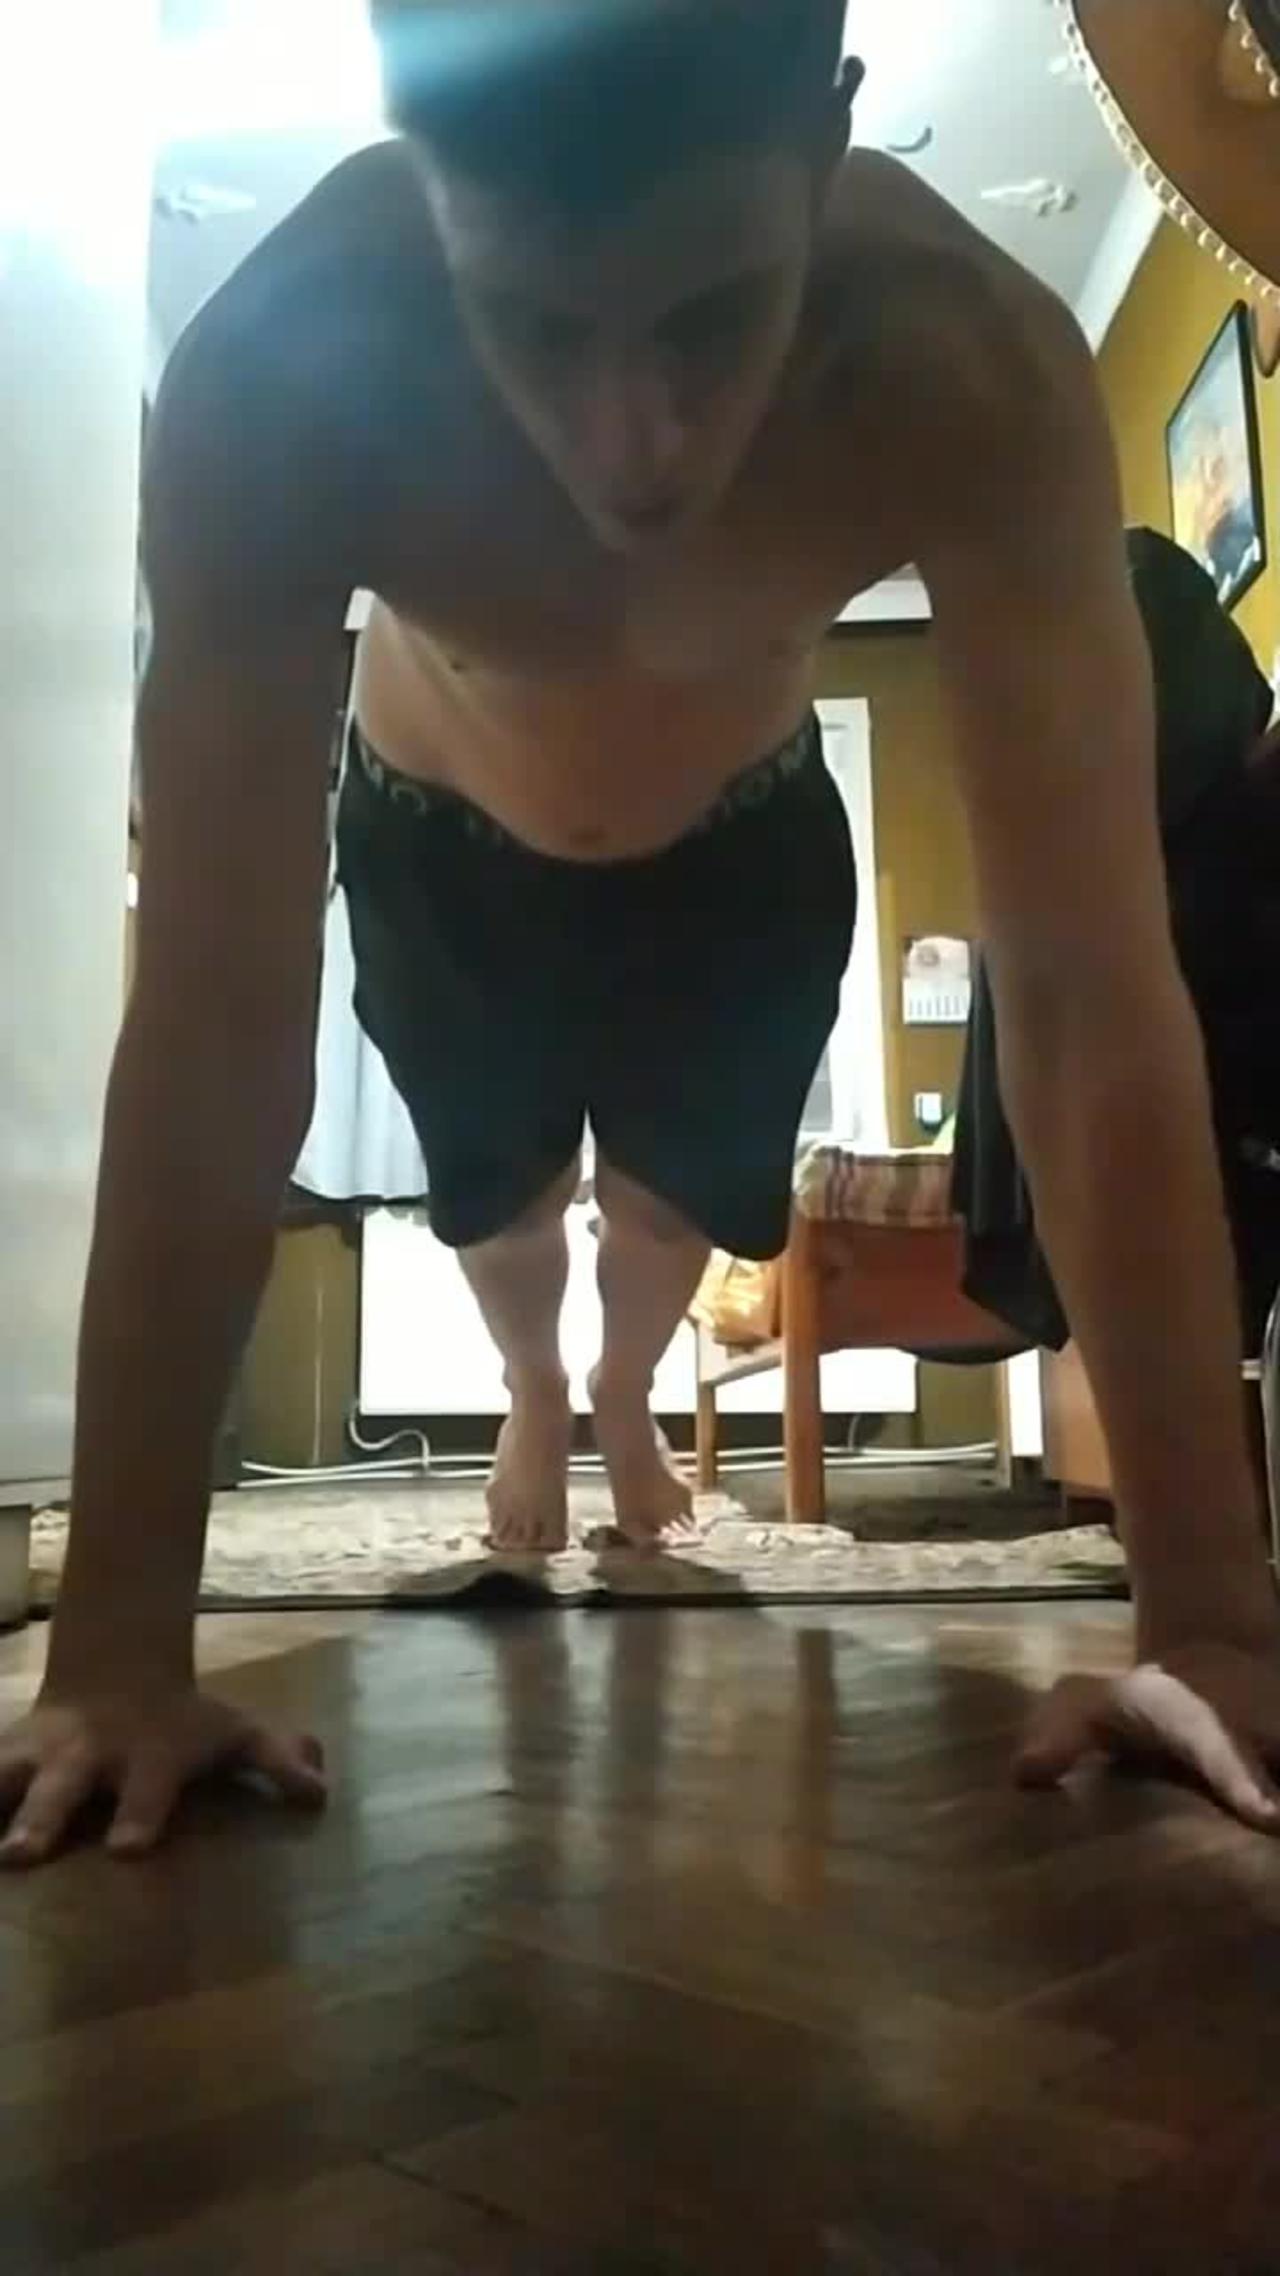 DAY 23 FROM 30 DAYS PUSHUP CHALLENGE